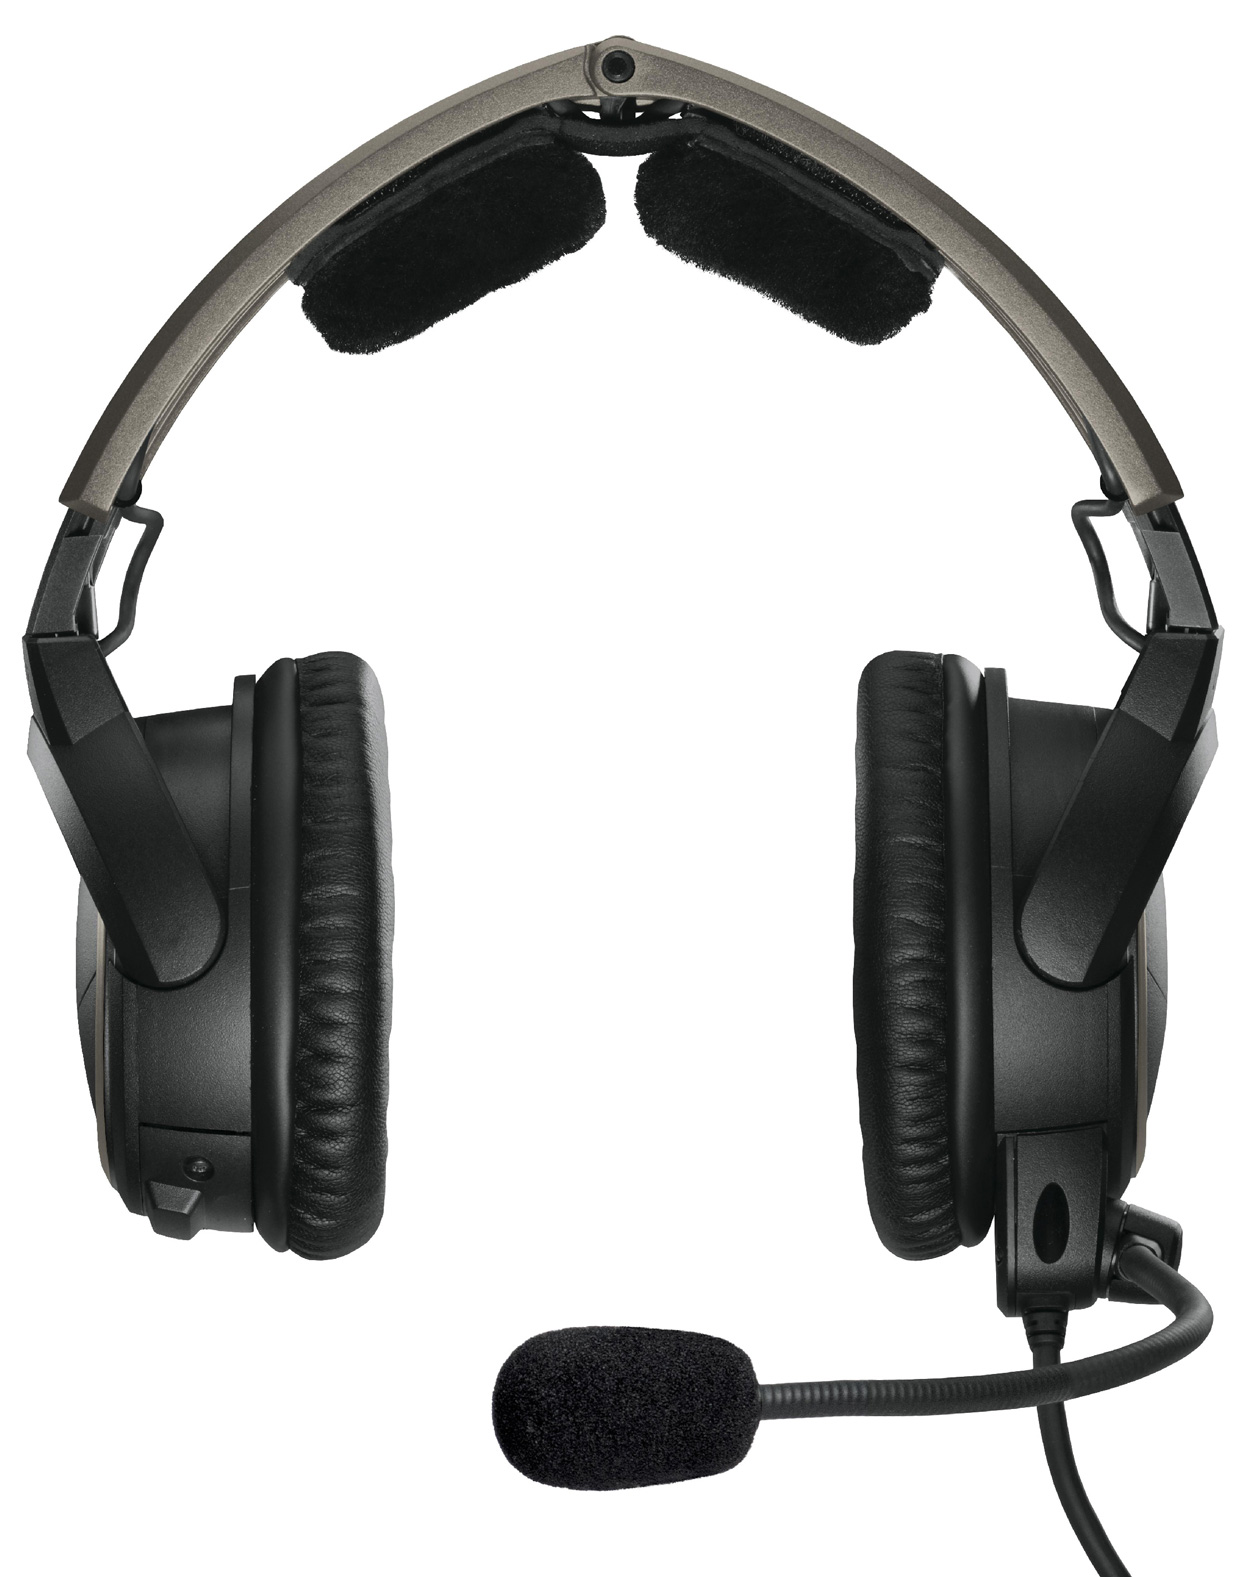 ANR - Bose A20 Fixed-Wing Headset with Twin Plugs, Non-Bluetooth, Battery powered, Hi Impedance (324843-2020)Image Id:150101